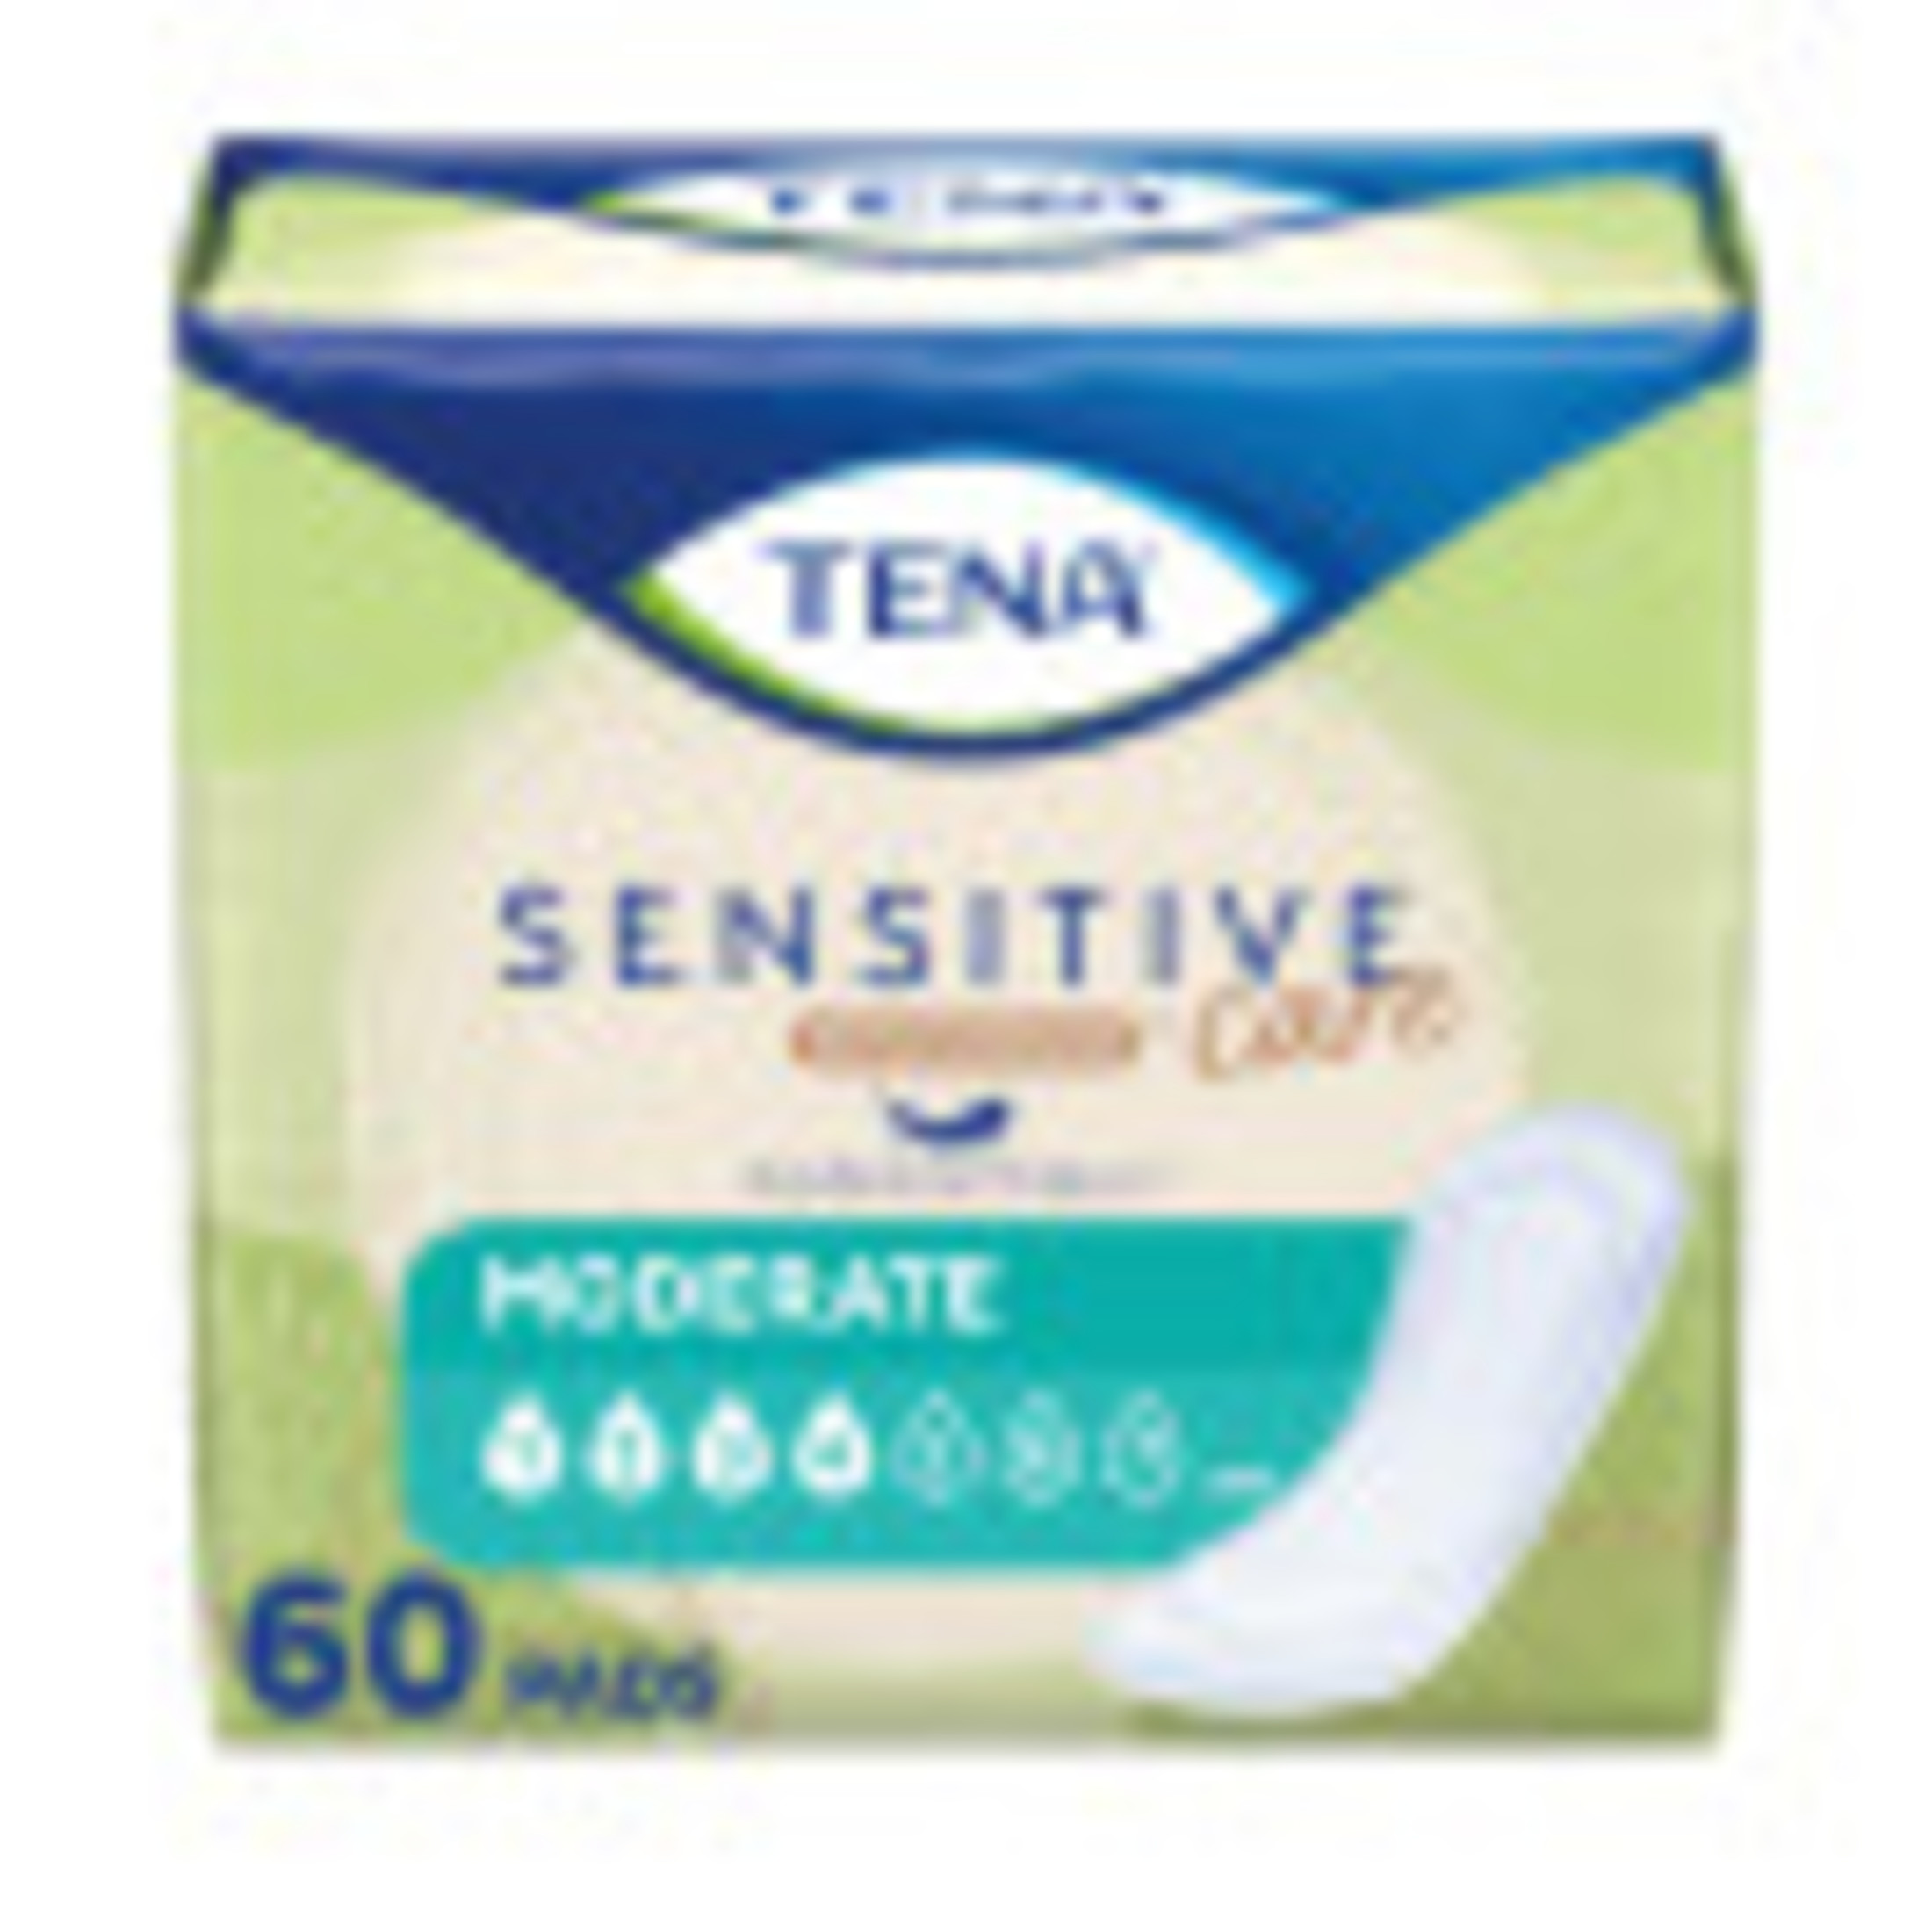 Tena Sensitive Care Extra Coverage Moderate Absorbency Incontinence Pad, 60ct - image 1 of 7